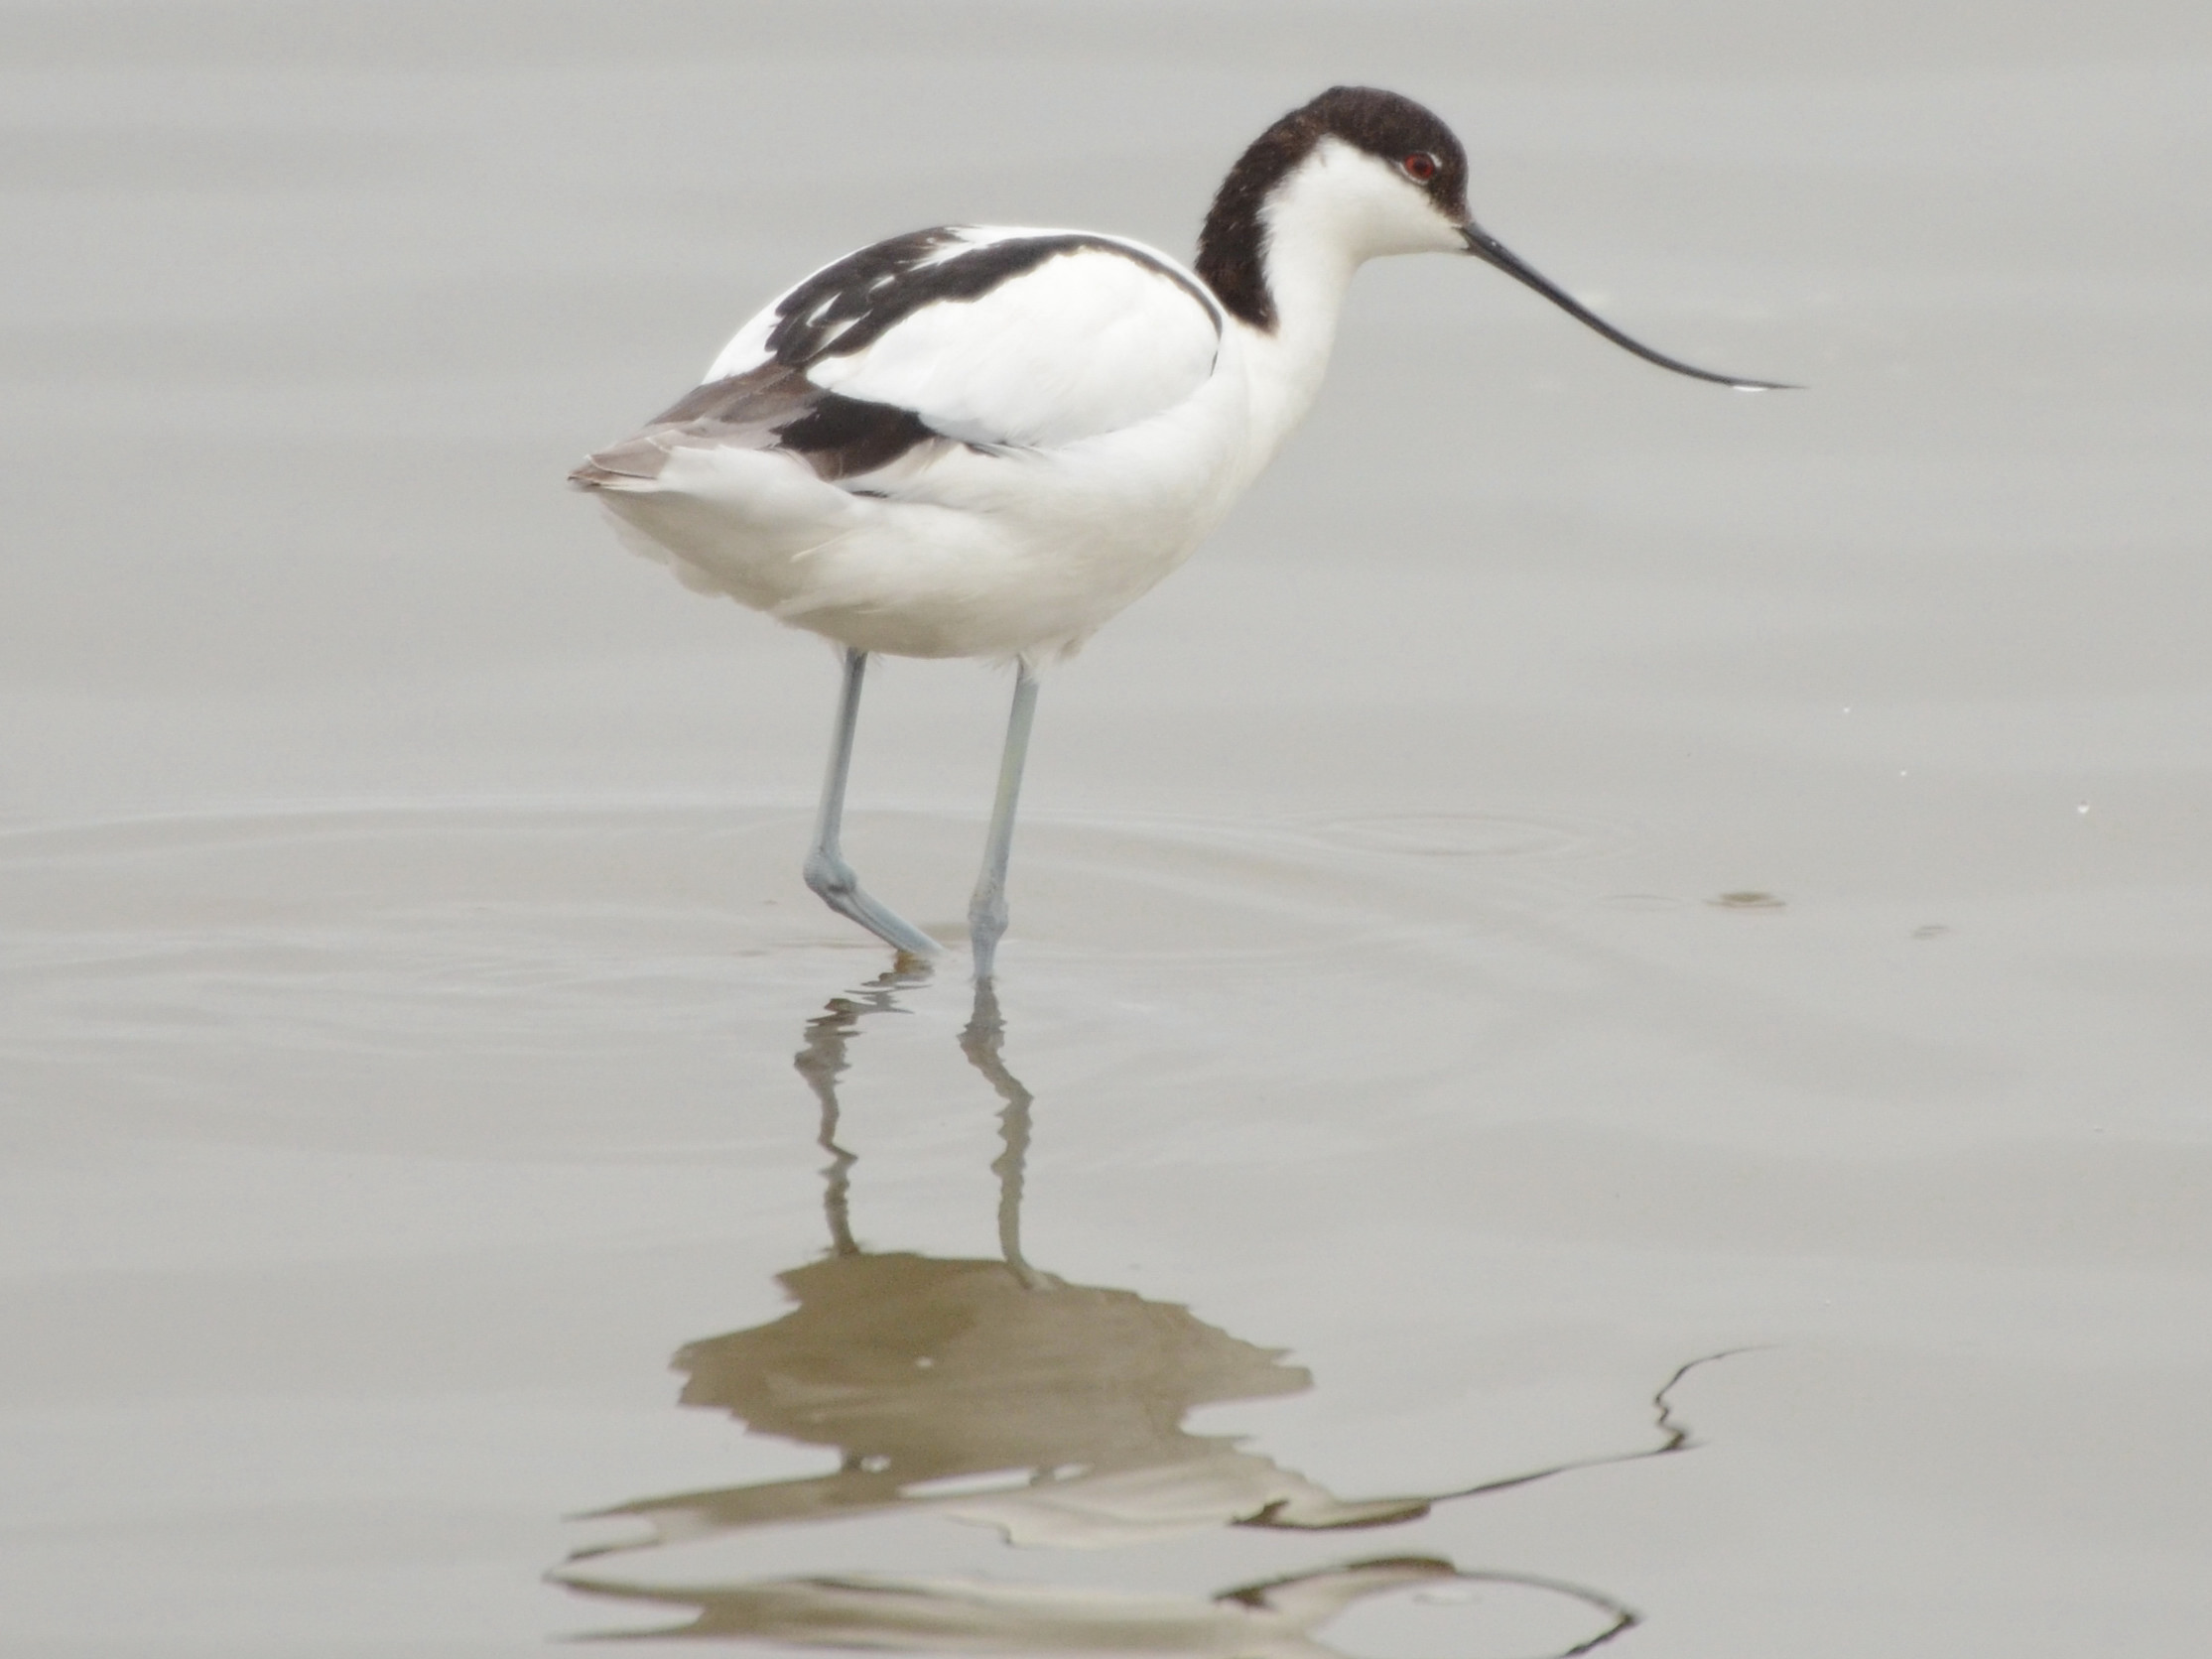 Click picture to see more Pied Avocets.